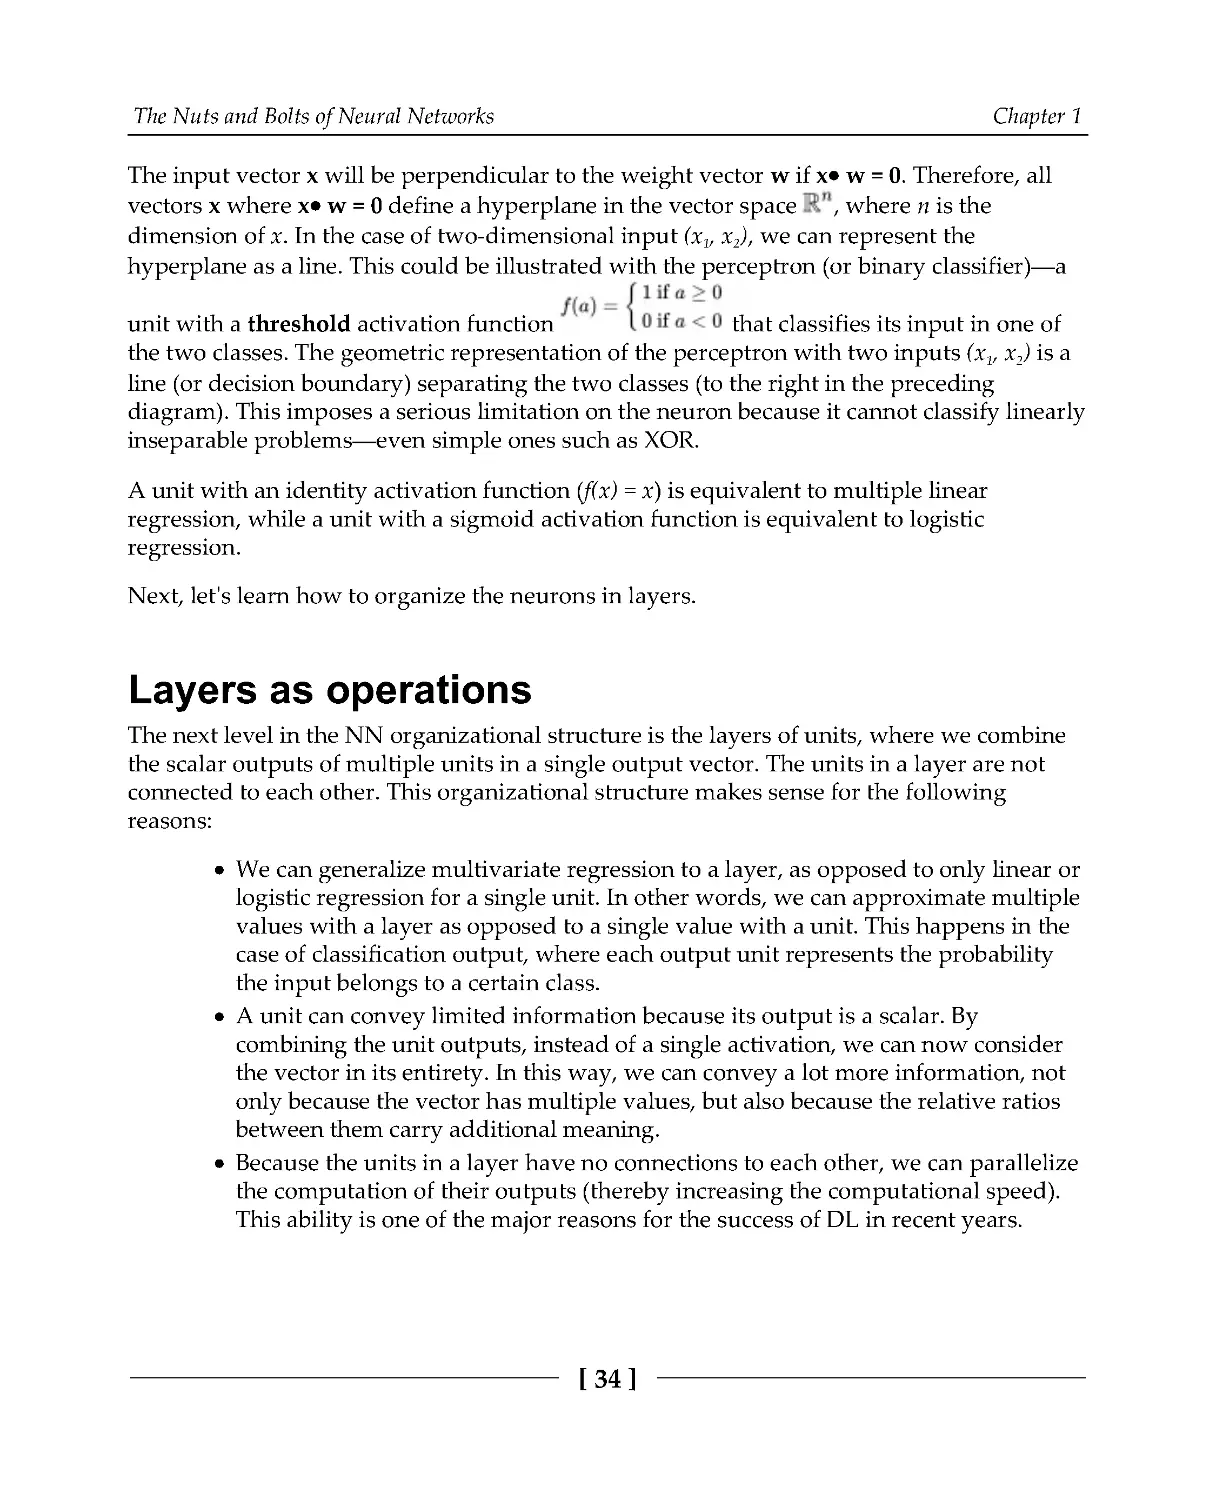 Layers as operations